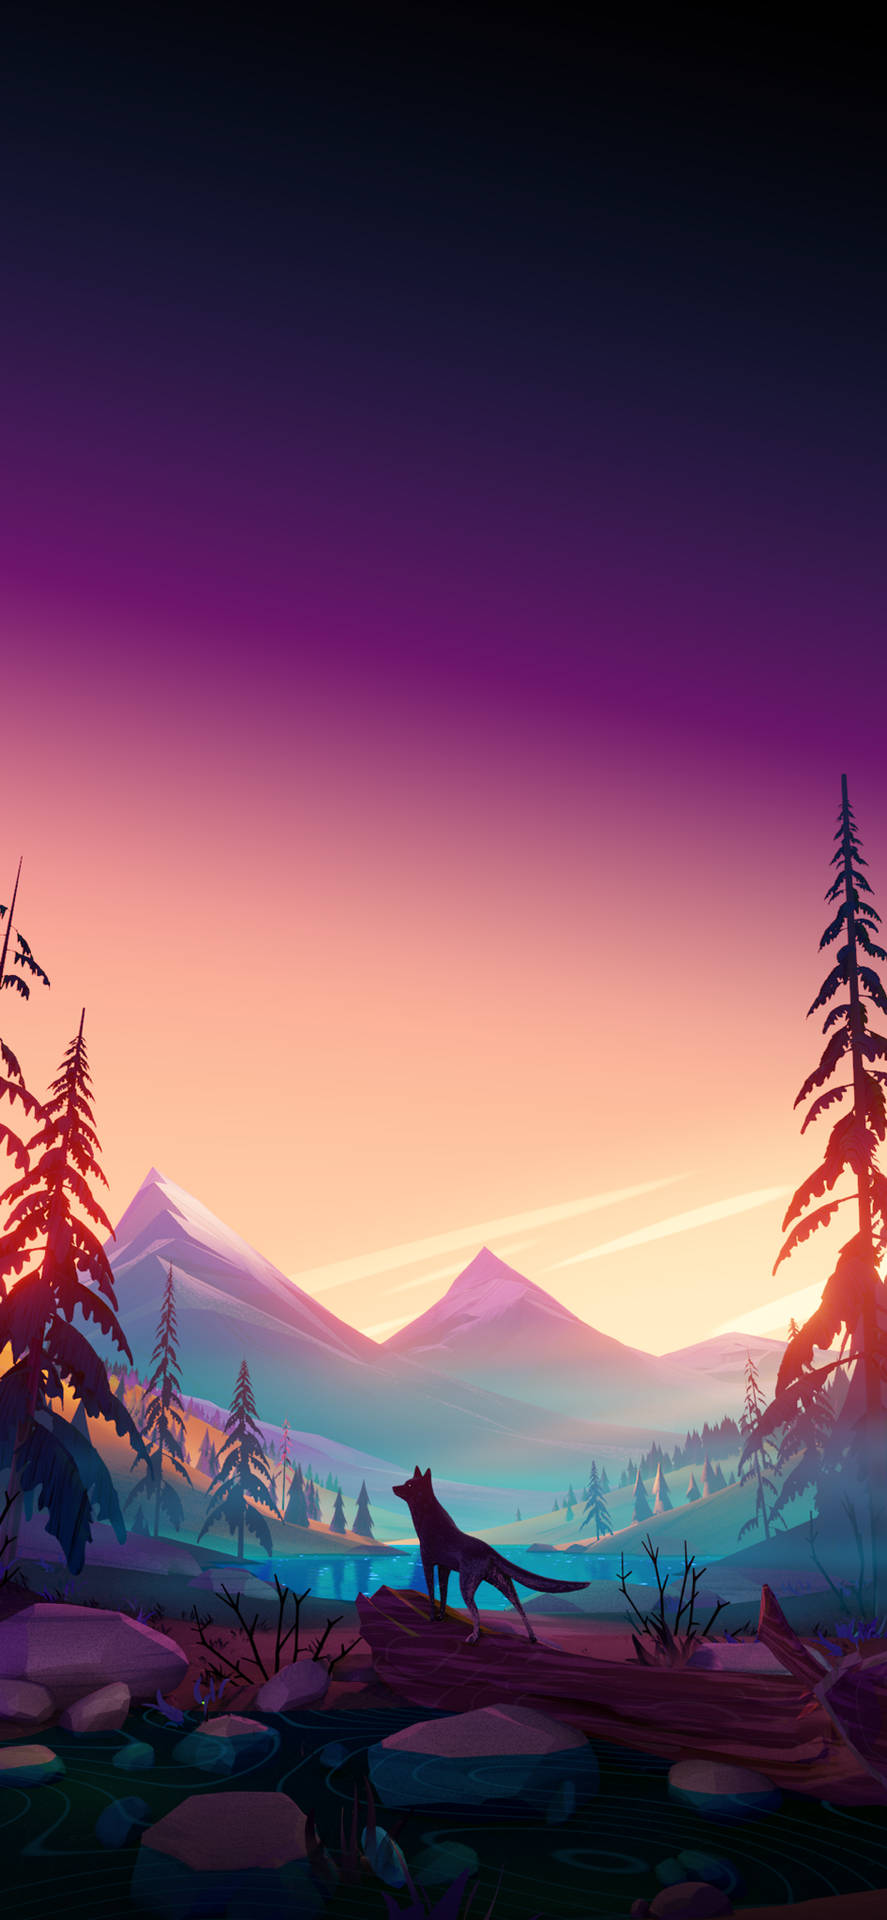 Wolf In Valley Illustration Iphone Wallpaper